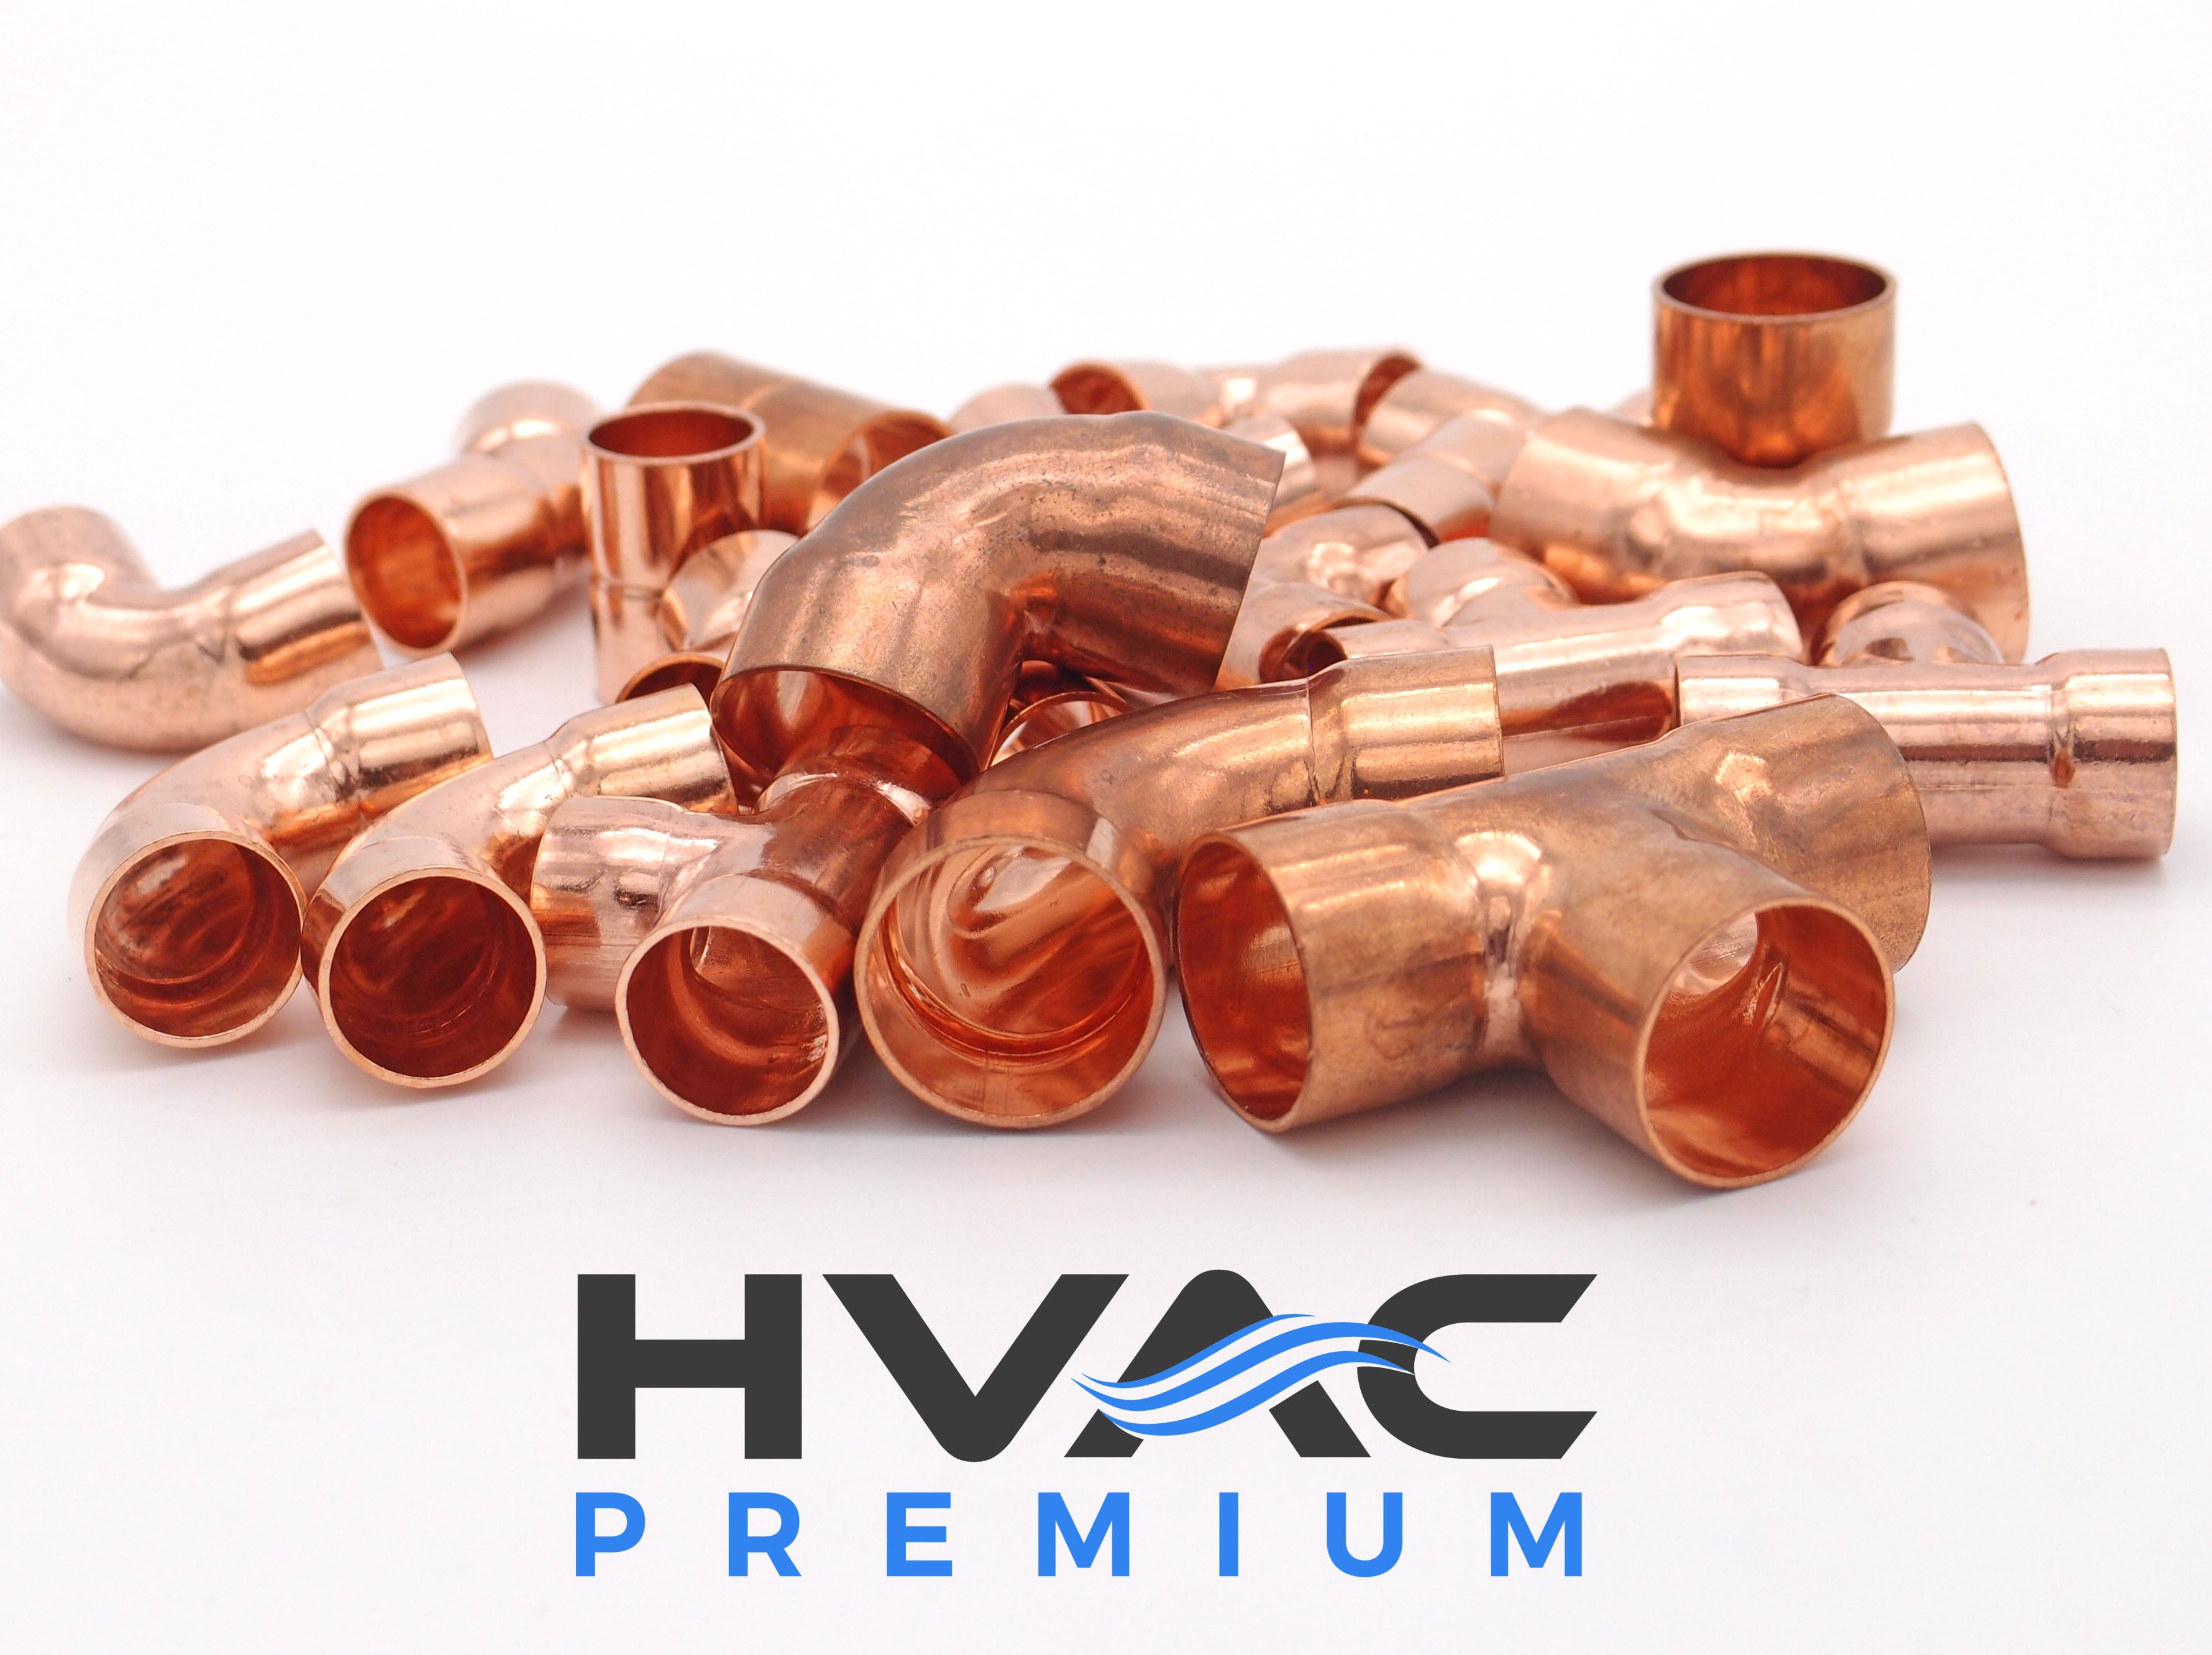 Copper Fitting 1 Inch (HVAC Outer Dimension) 7/8 Inch (Plumbing Inner Dimension) - Straight Copper Coupling Fittings With Rolled Tube Stop & HVAC – 99.9% Pure Copper - 5 Pack